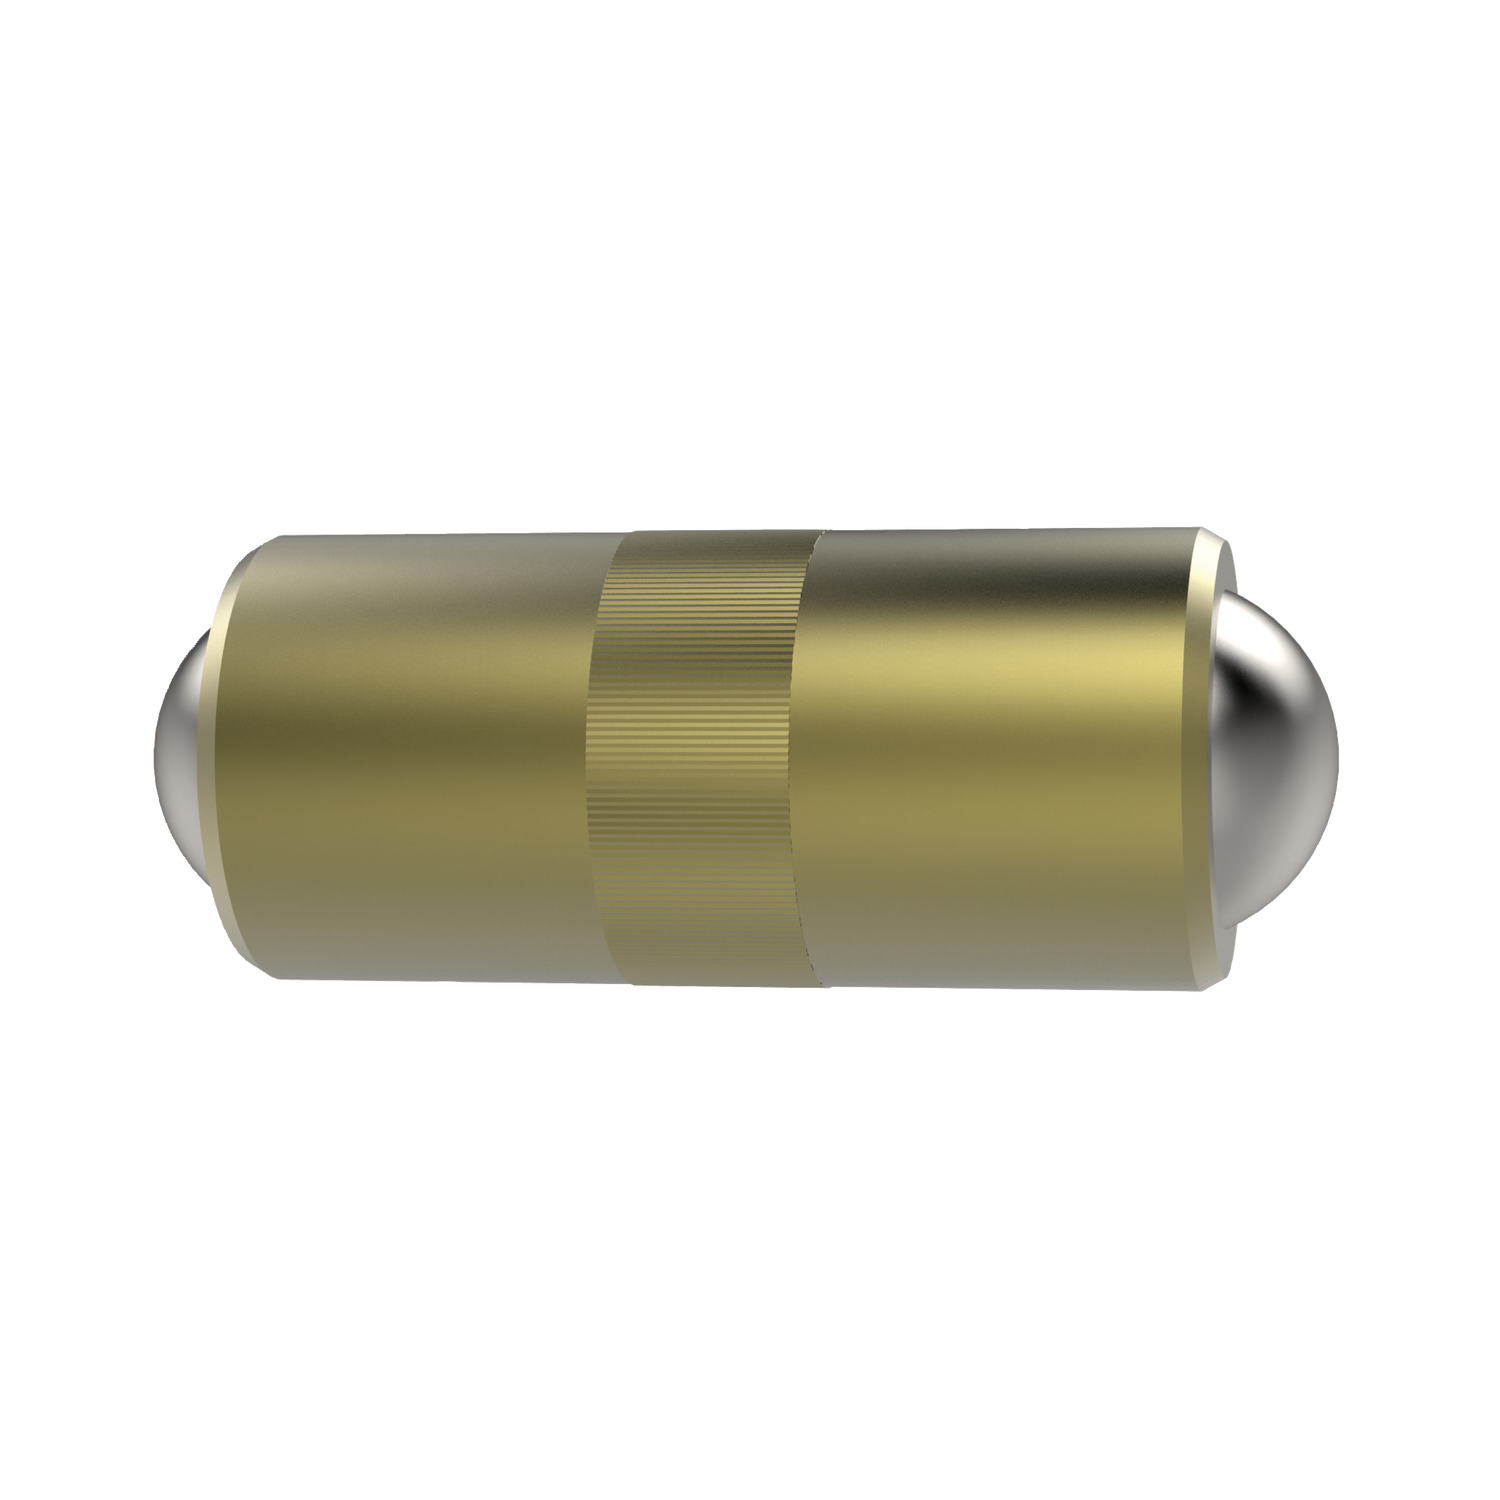 Spring Plungers A double ended spring plunger with a central knurled section for ease of installation. They are used mainly for axial location and securing of bolts.